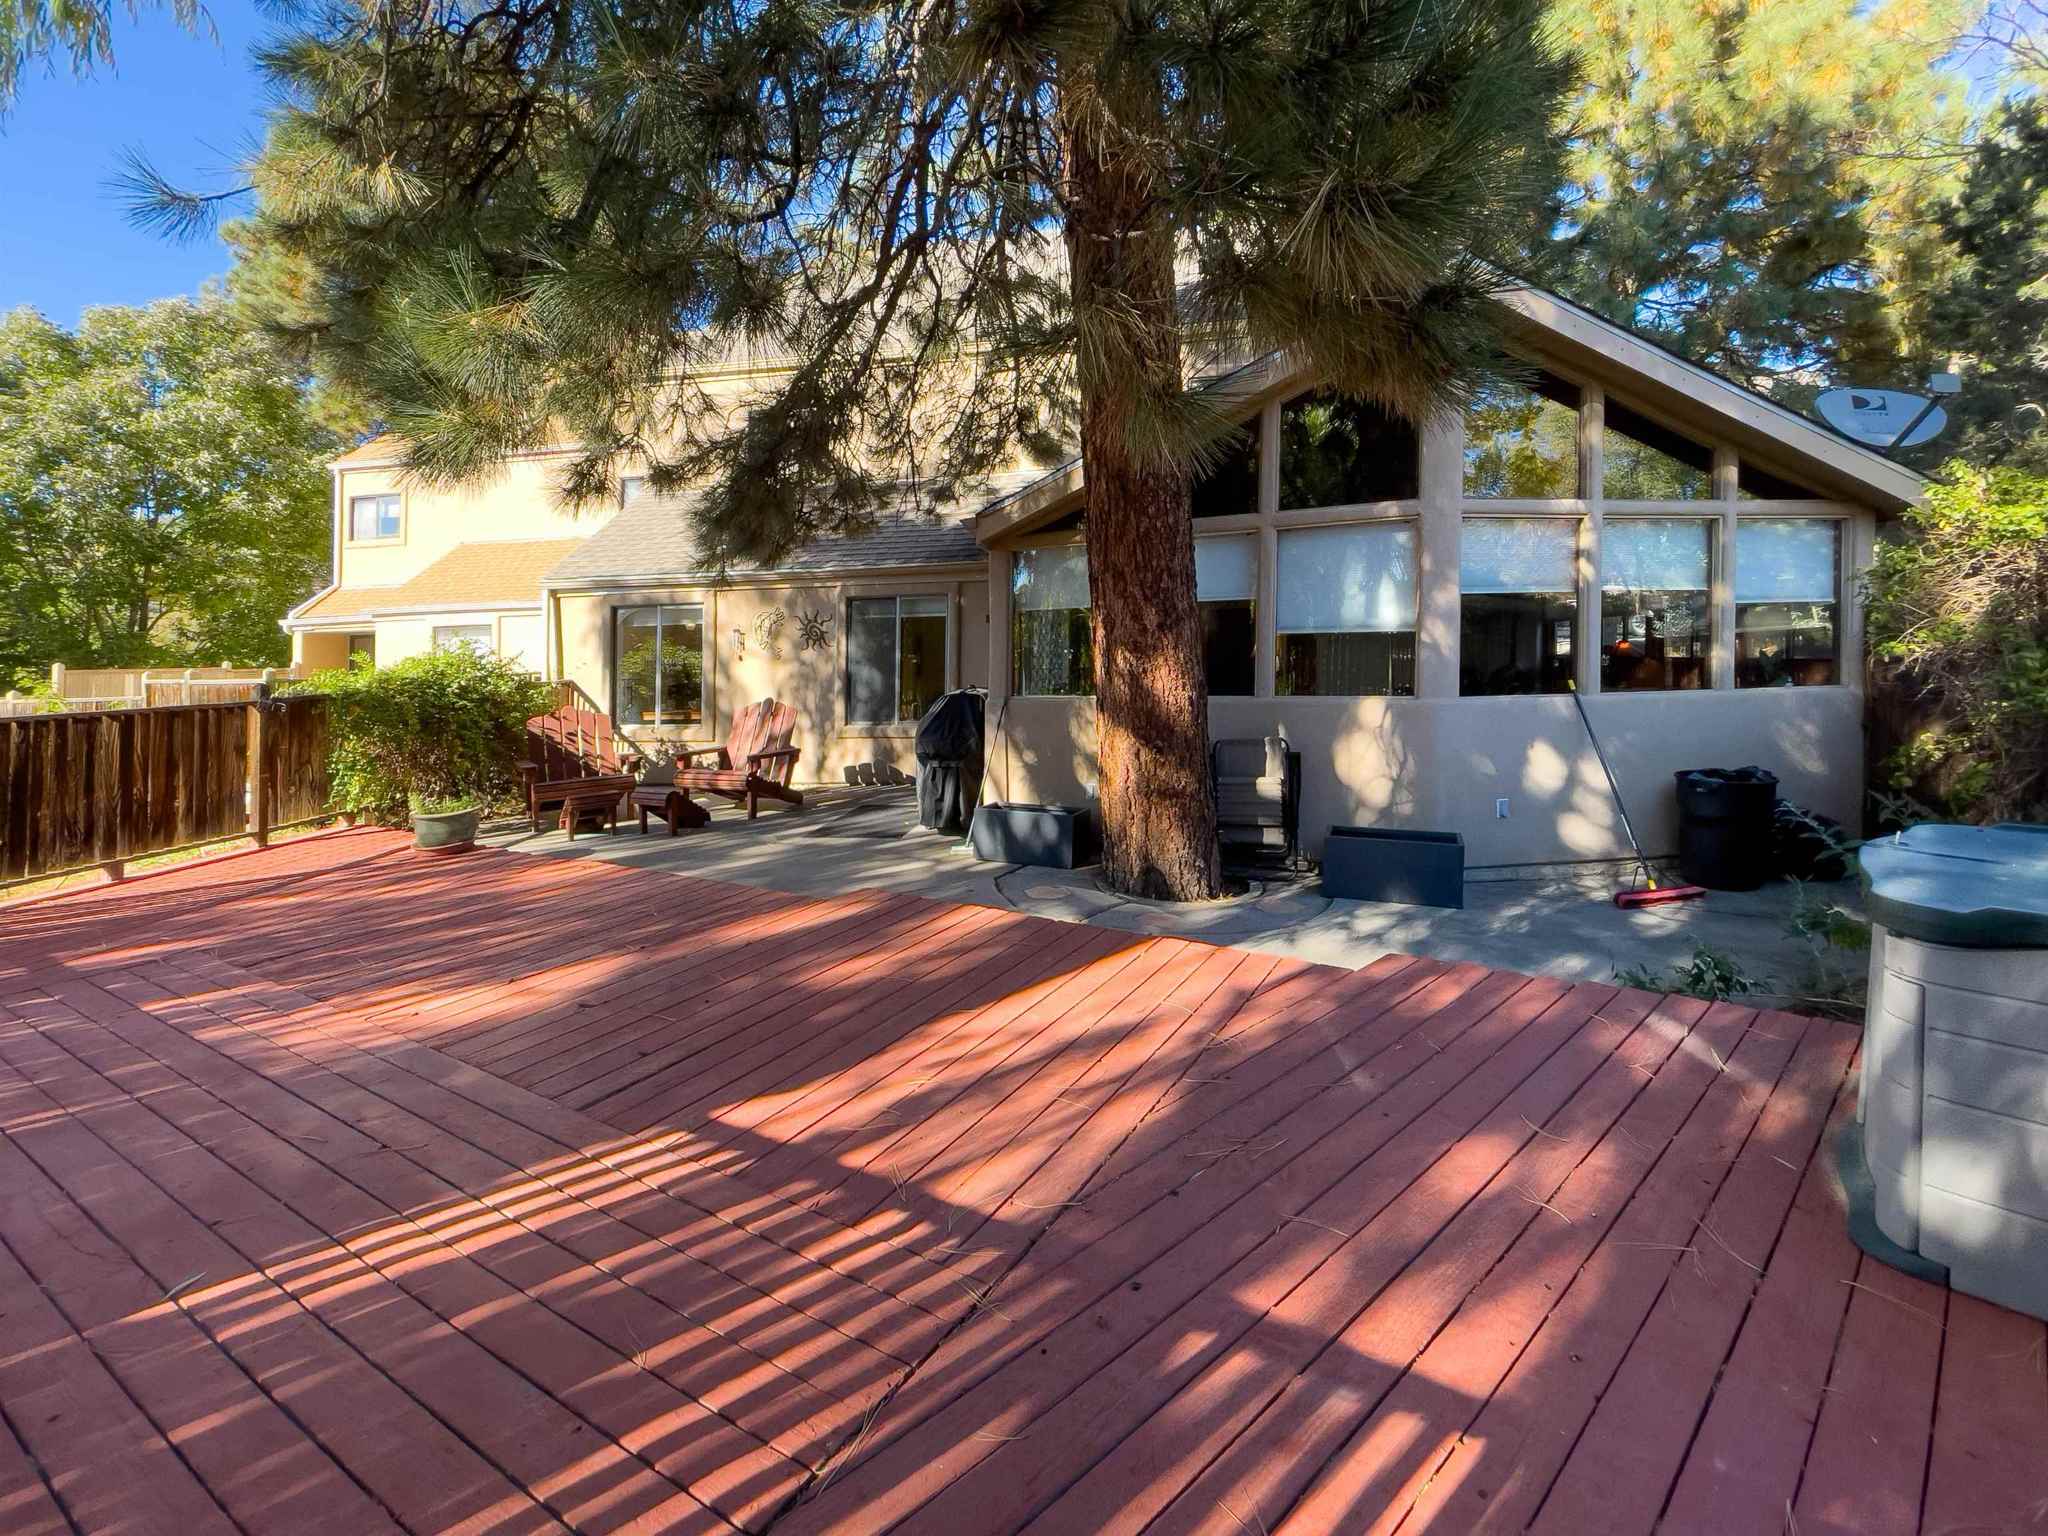 47 TIMBER RIDGE, Los Alamos, New Mexico 87544, 3 Bedrooms Bedrooms, ,3 BathroomsBathrooms,Residential,For Sale,47 TIMBER RIDGE,202104825